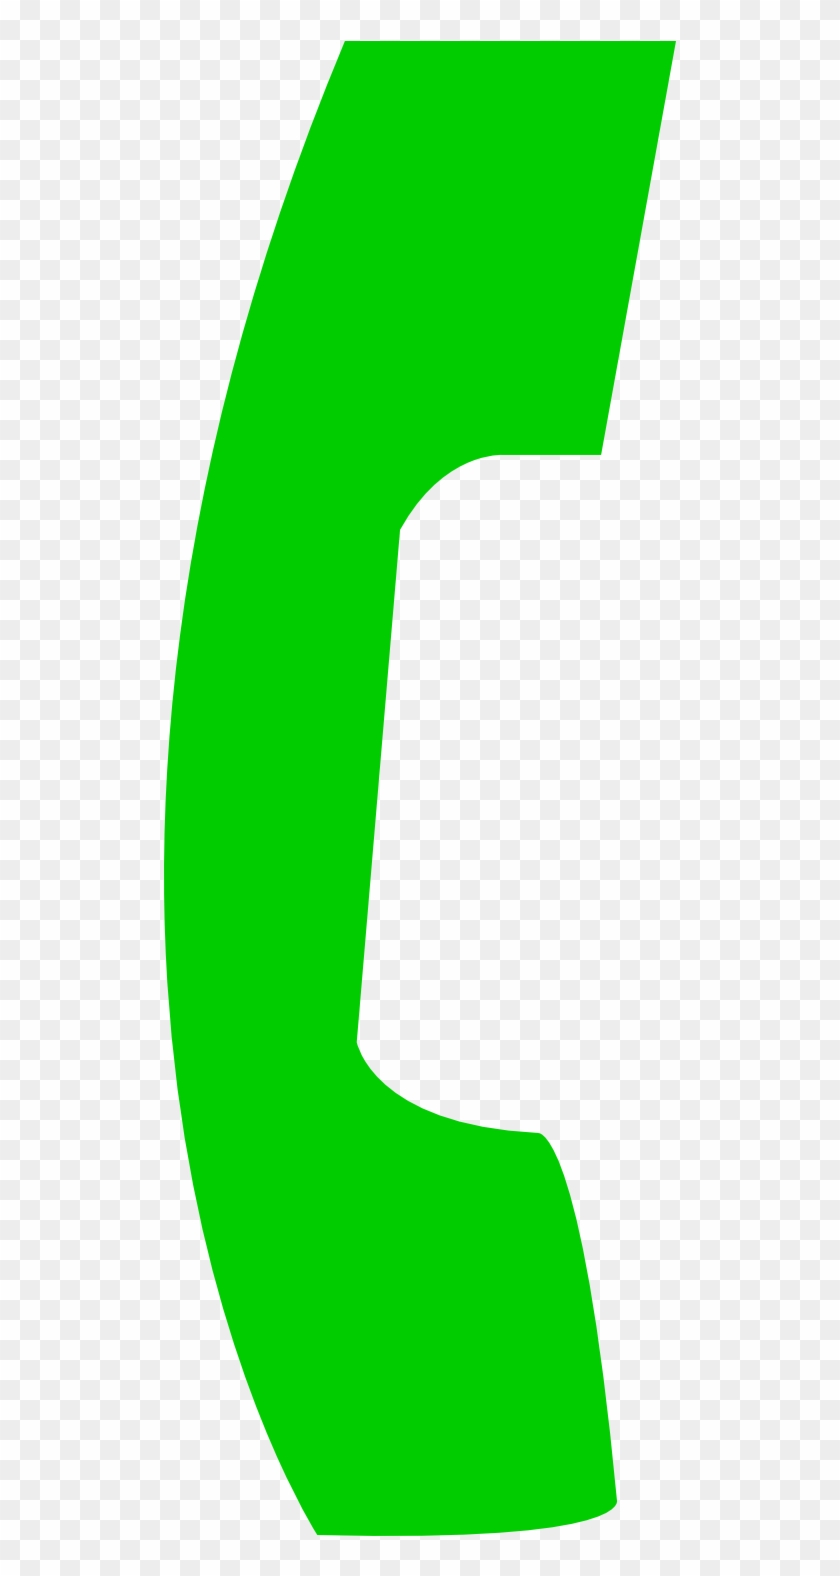 Clip Arts Related To - Green Call Phone Icon #802141